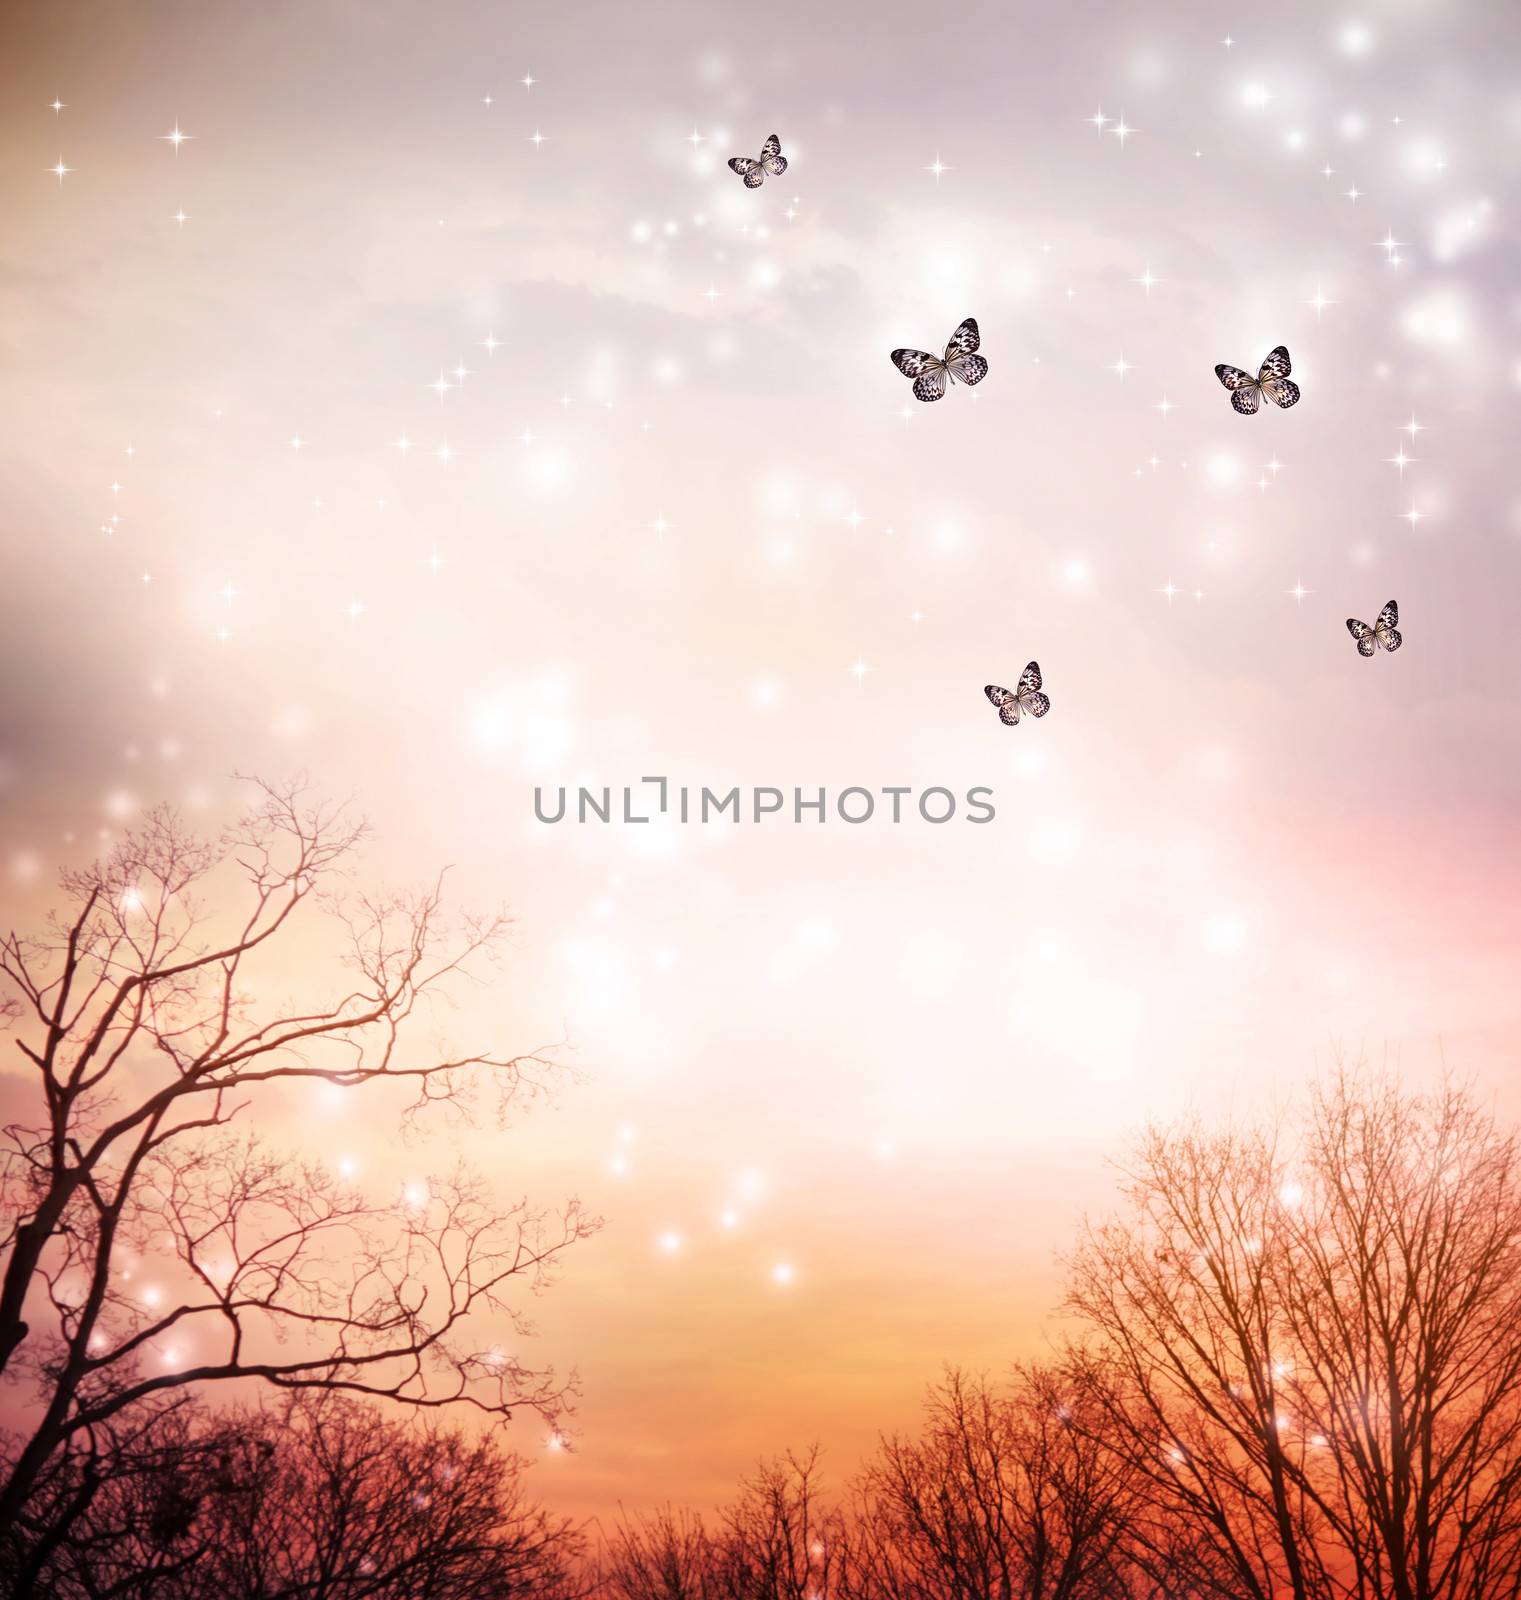 Small butterflies over the trees in the red sky background